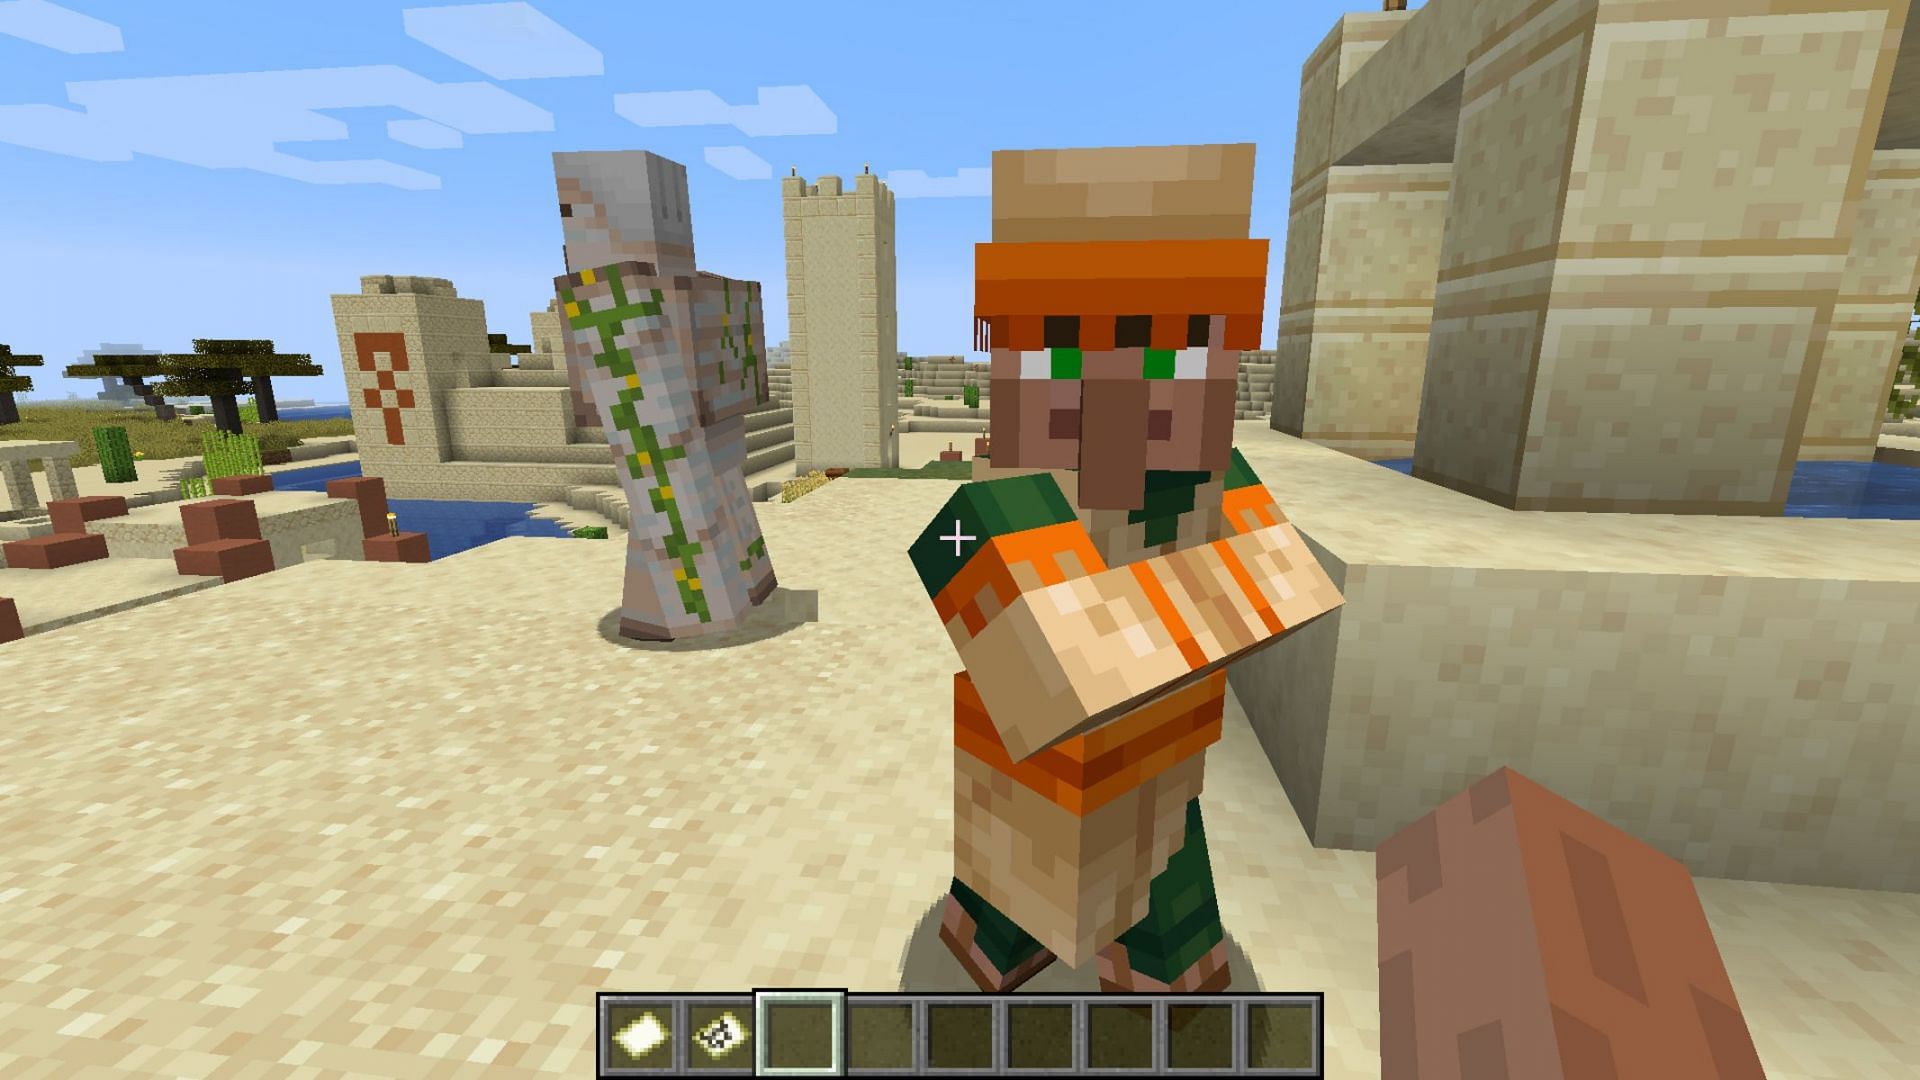 Prudent trading will save players plenty of emeralds in Minecraft (Image via Mojang)